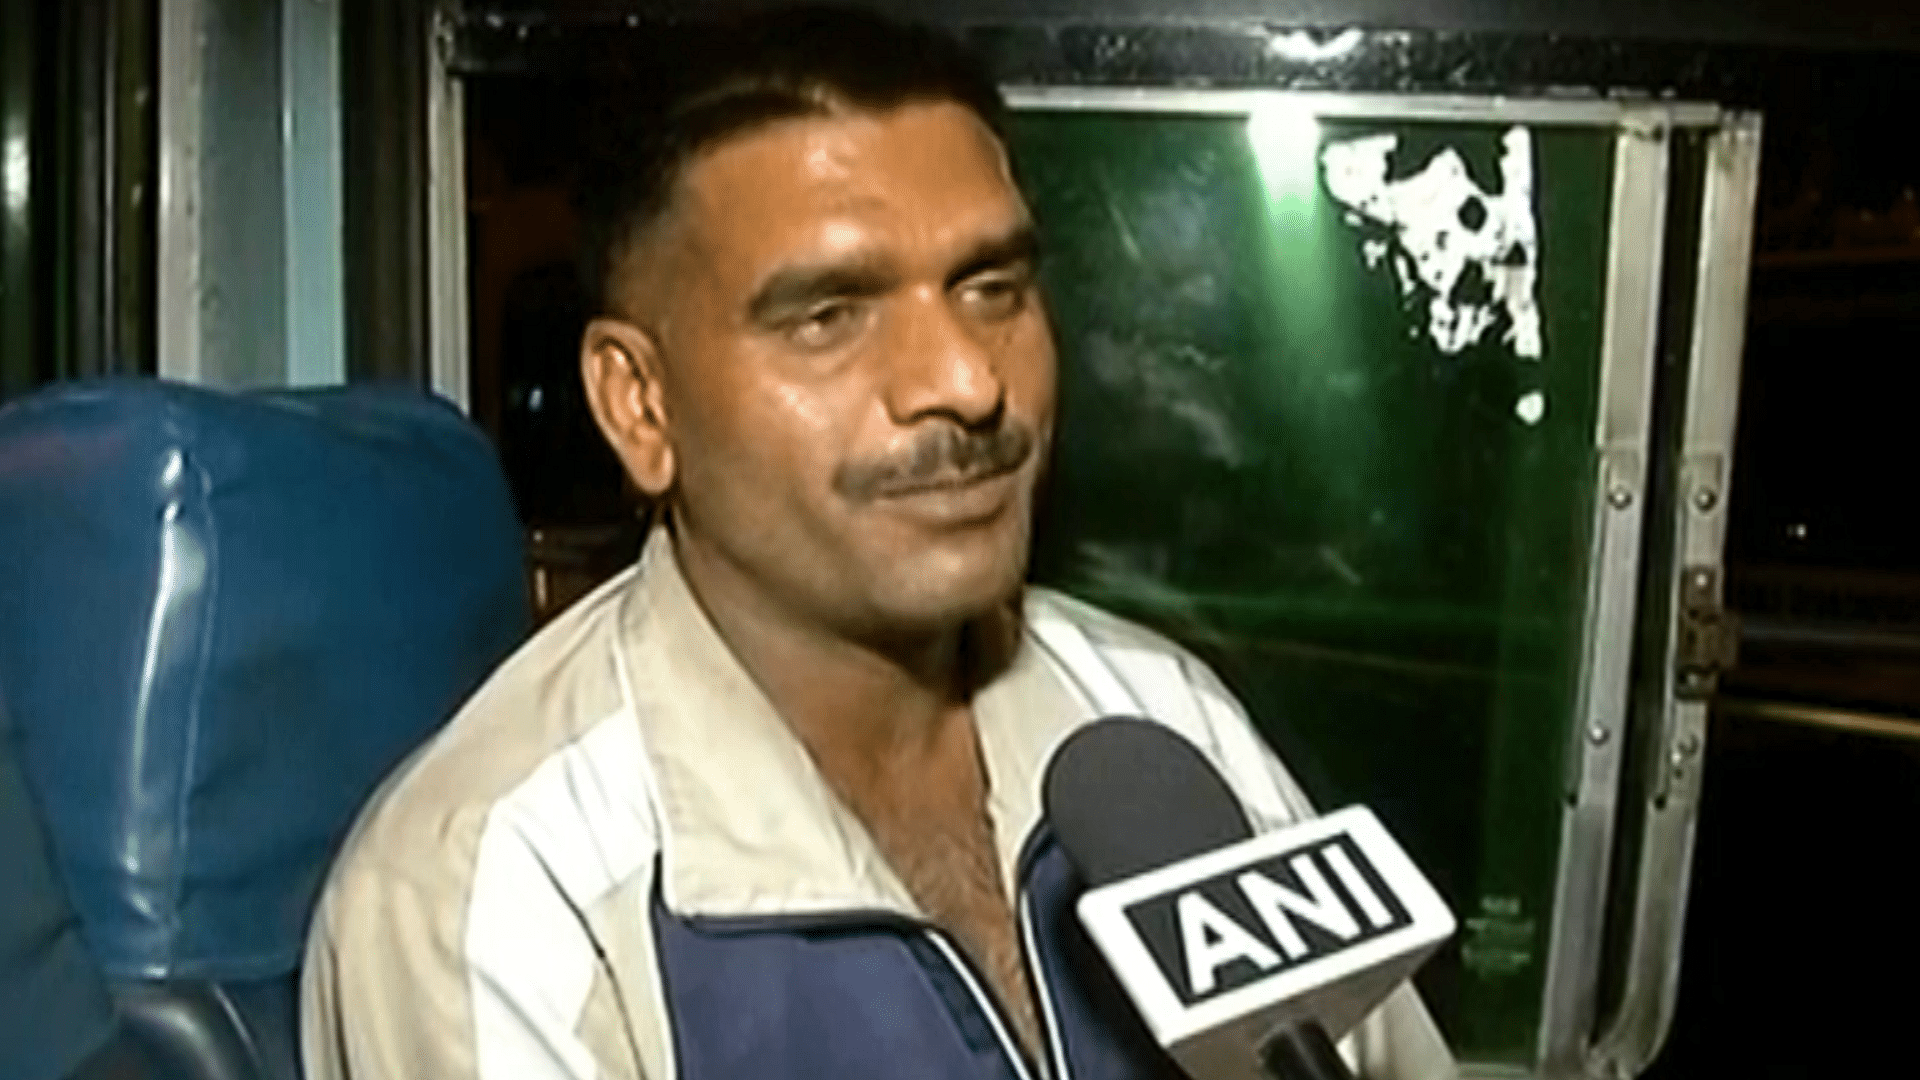 

A BSF spokesman said constable Yadav “was found guilty of all the charges and awarded dismissal from service.” (Photo: ANI)